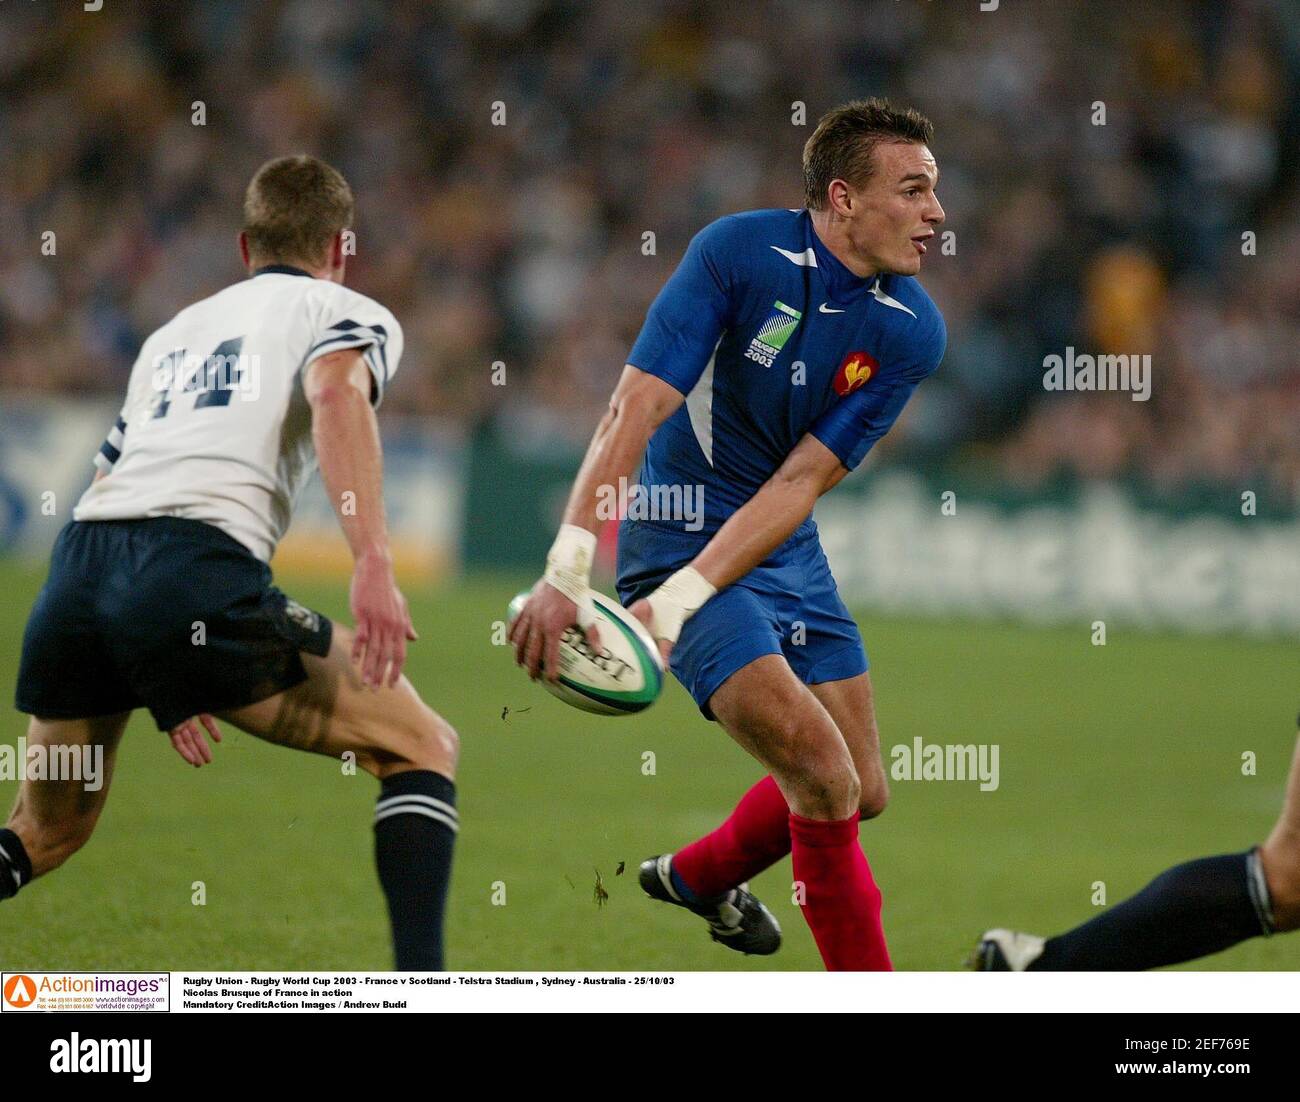 Rugby Union - Rugby World Cup 2003 - France v Scotland - Telstra Stadium , Sydney - Australia - 25/10/03  Nicolas Brusque of France in action  Mandatory Credit:Action Images / Andrew Budd Stock Photo